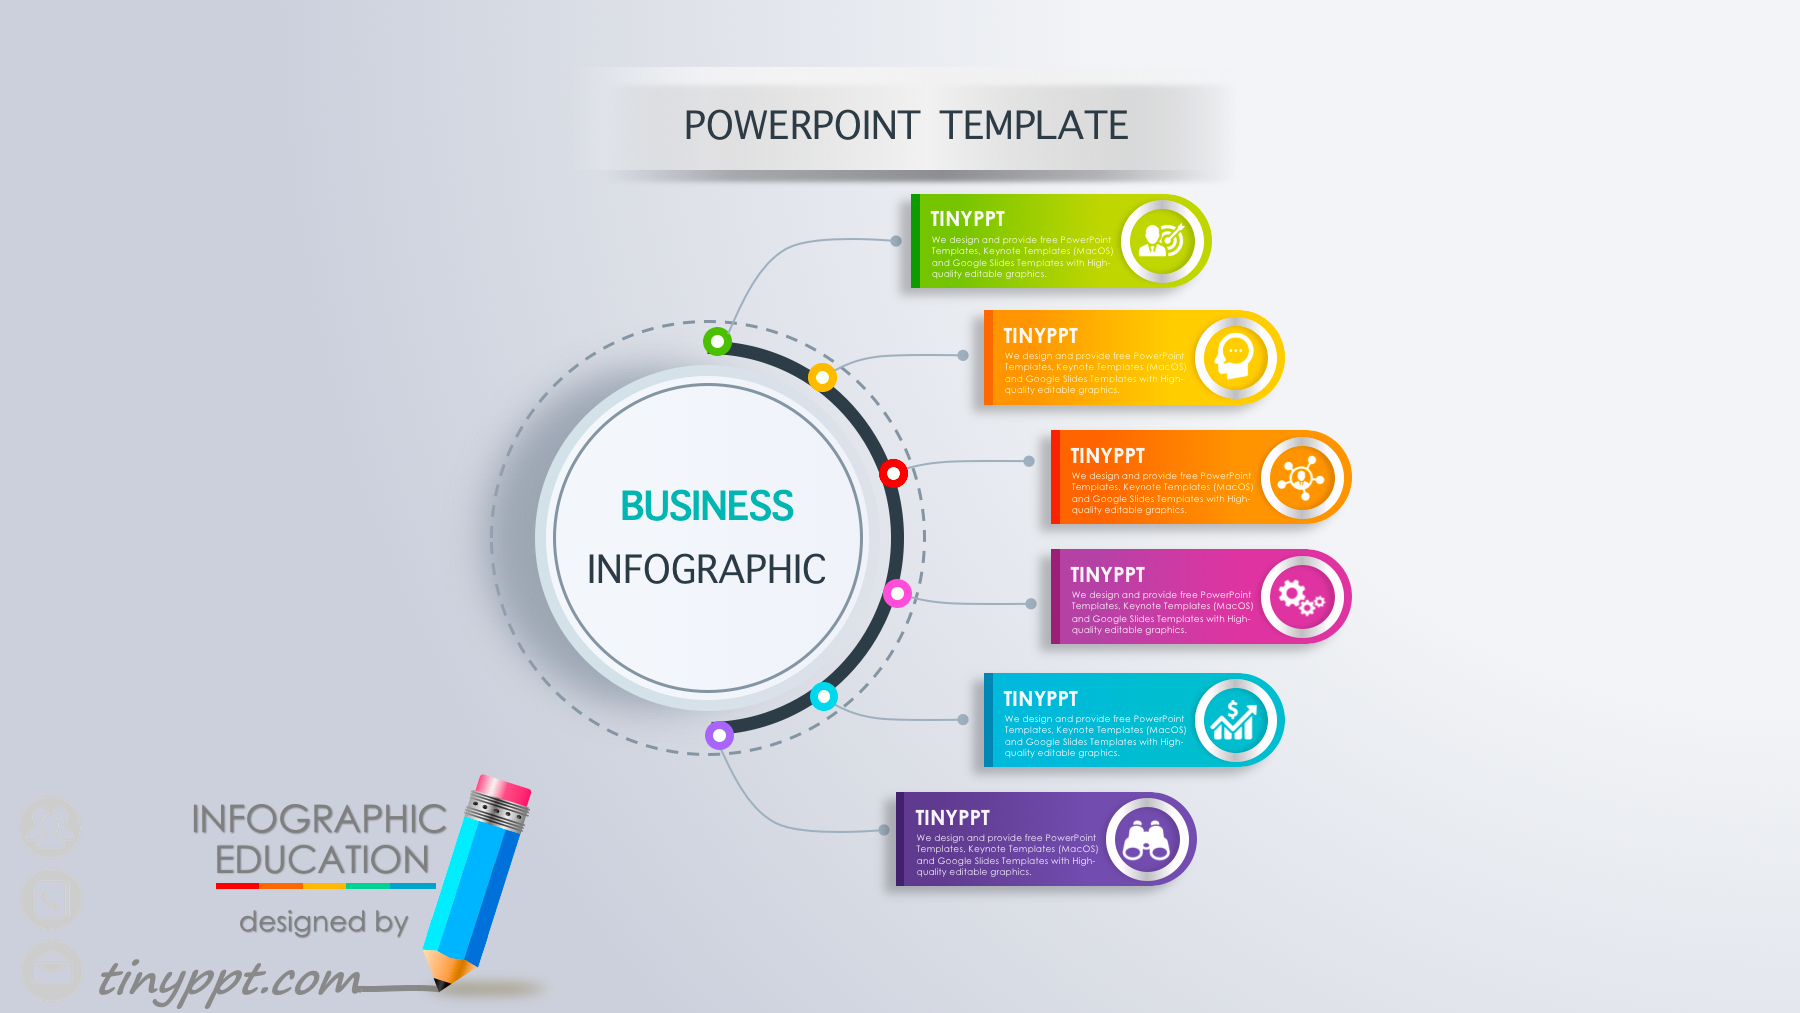 Powerpoint Timeline Template Free 2018 For Business | Design Regarding Free Nursing Powerpoint Templates